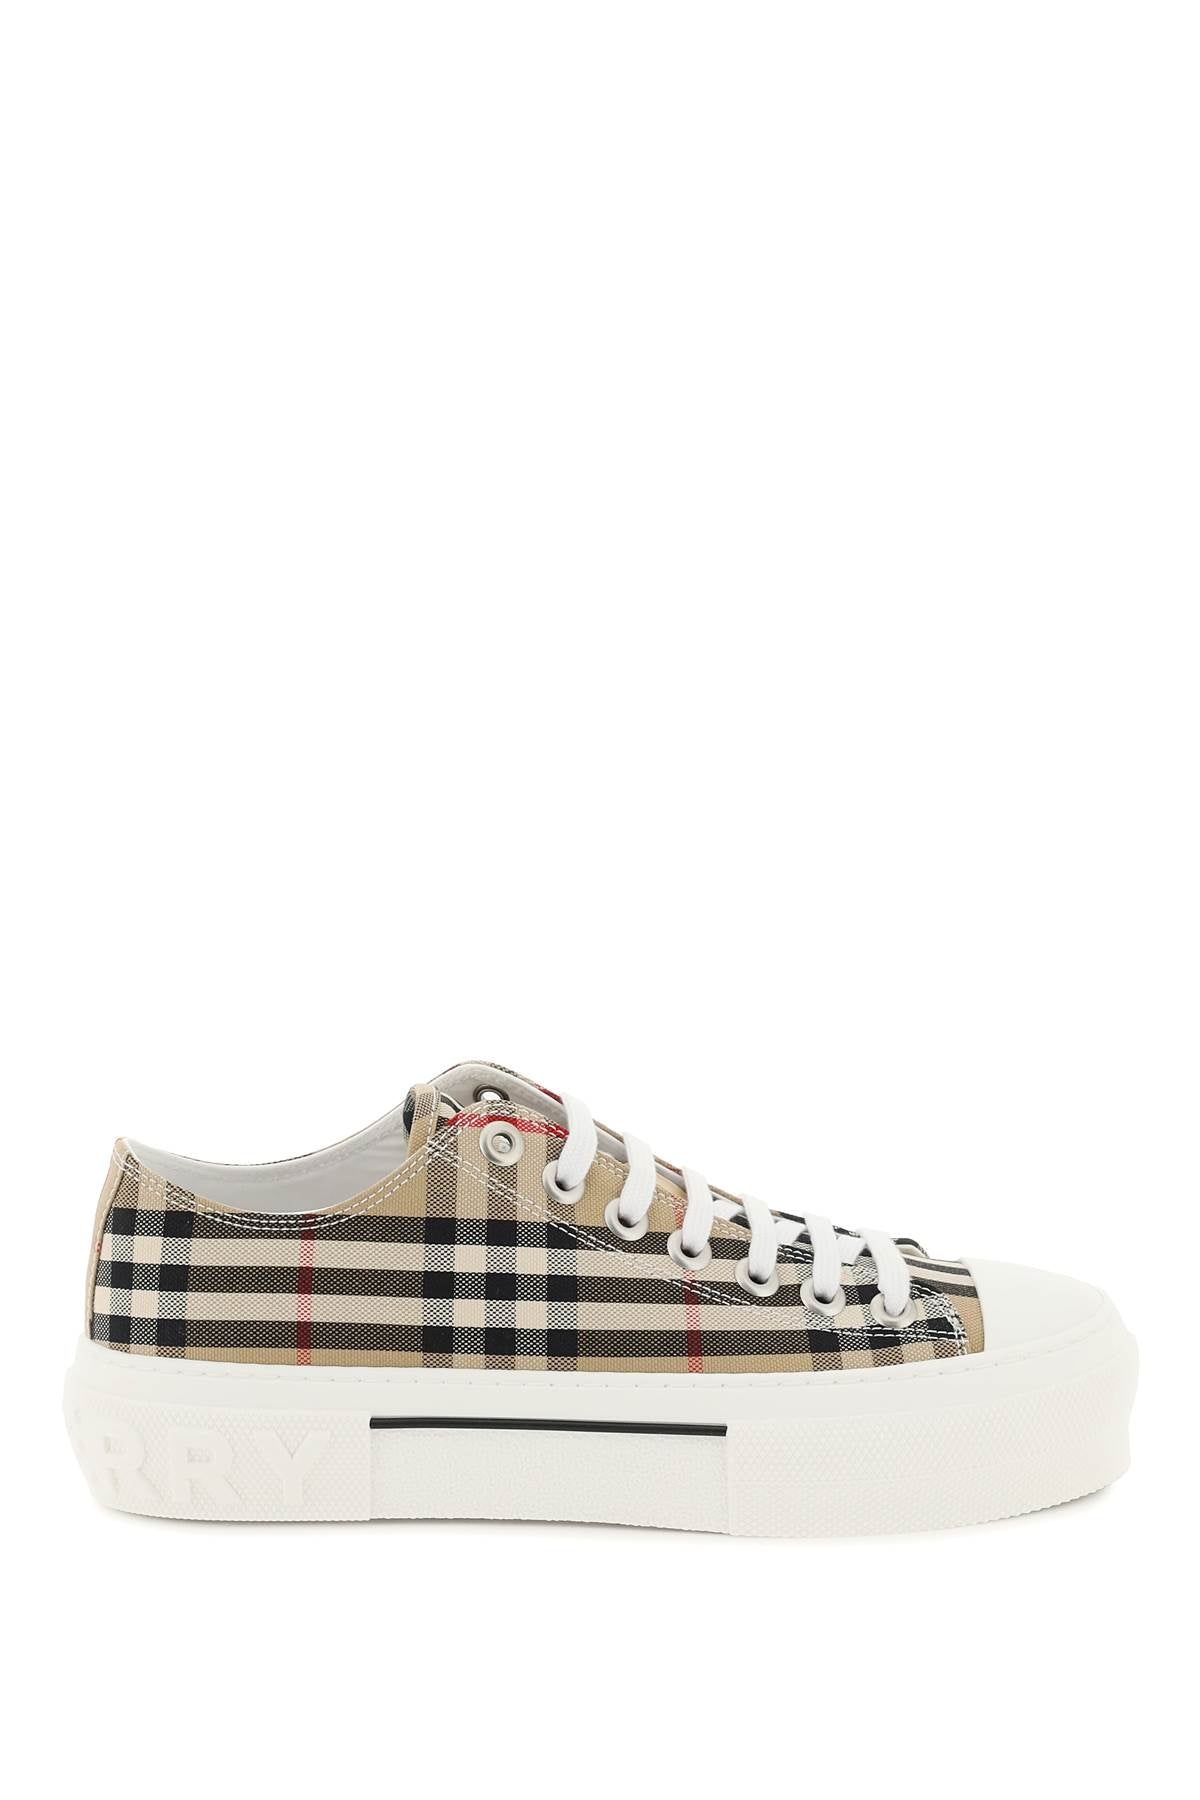 Burberry Vintage Check Low Sneakers Women - 1